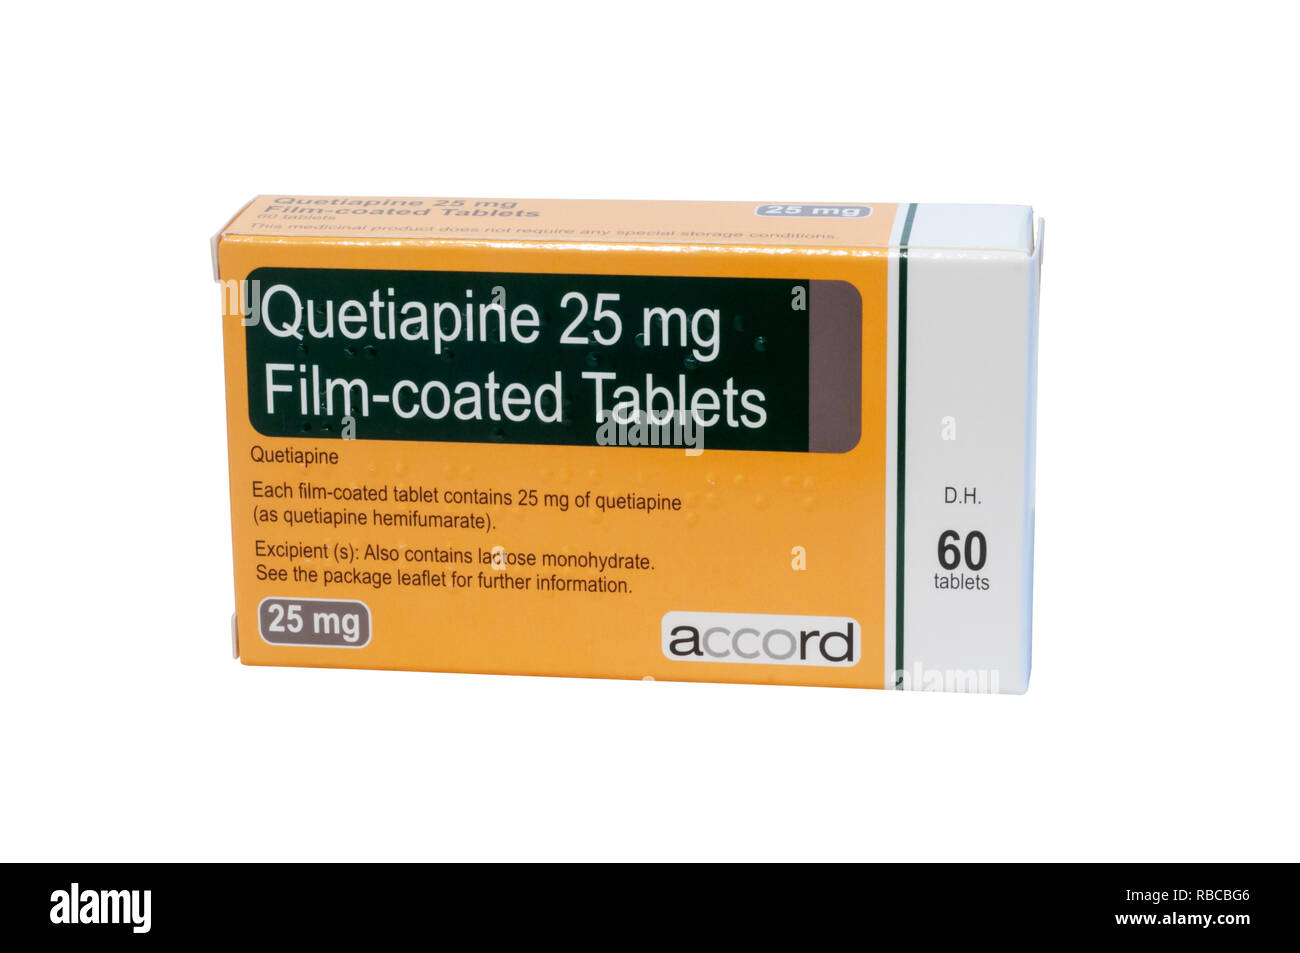 A packet of Quetiapine tablets, an antipsychotic medicine used in the treatment of schizophrenia, bipolar disorder and depressive disorders. Stock Photo